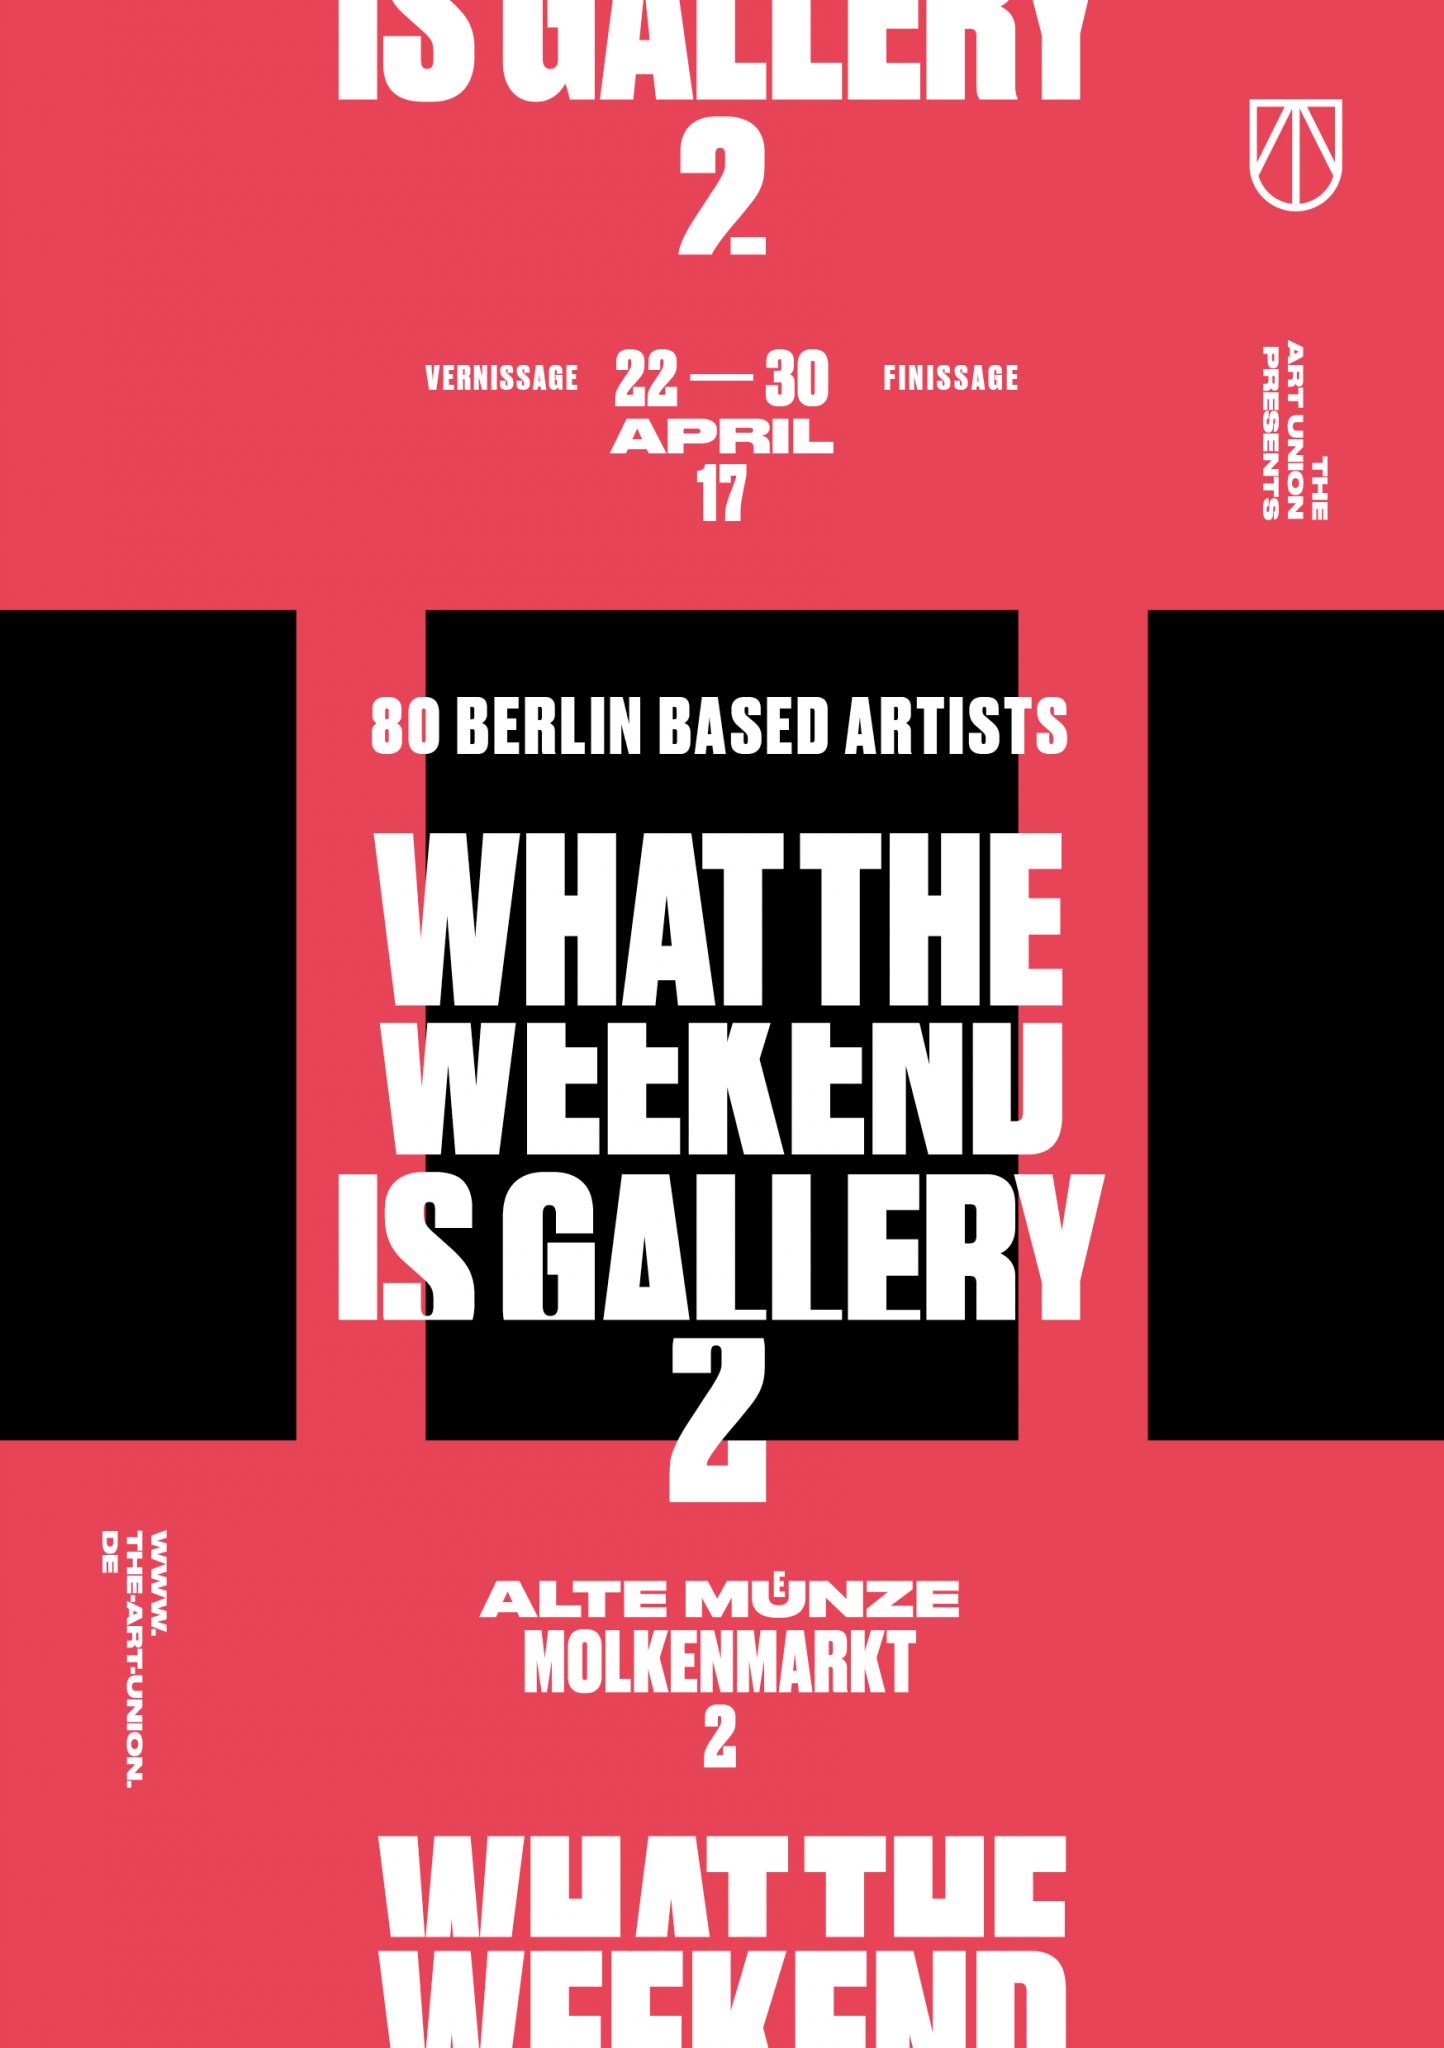 THE ART UNION What The Weekend Is Gallery 2 – a group exhibition featuring artworks by 80 Berlin based artists